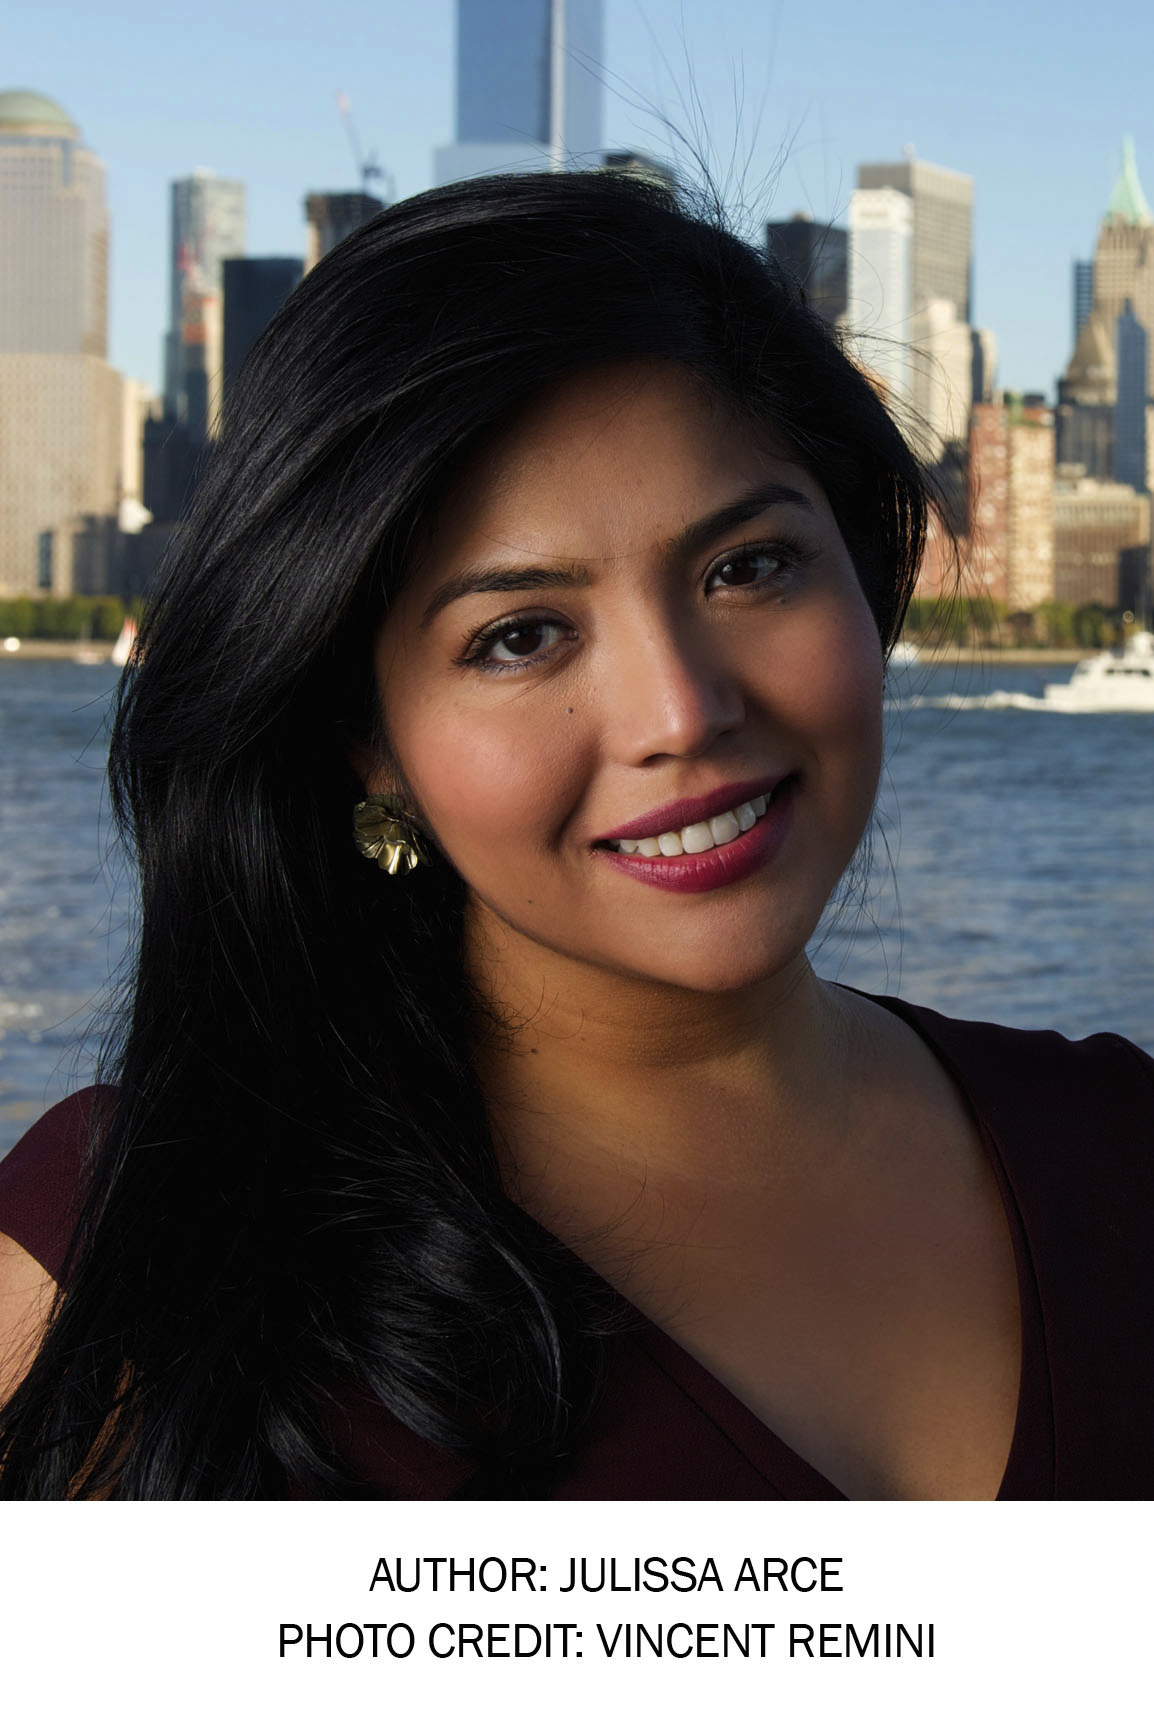 From undocumented immigrant to Wall Street: Julissa Arce 